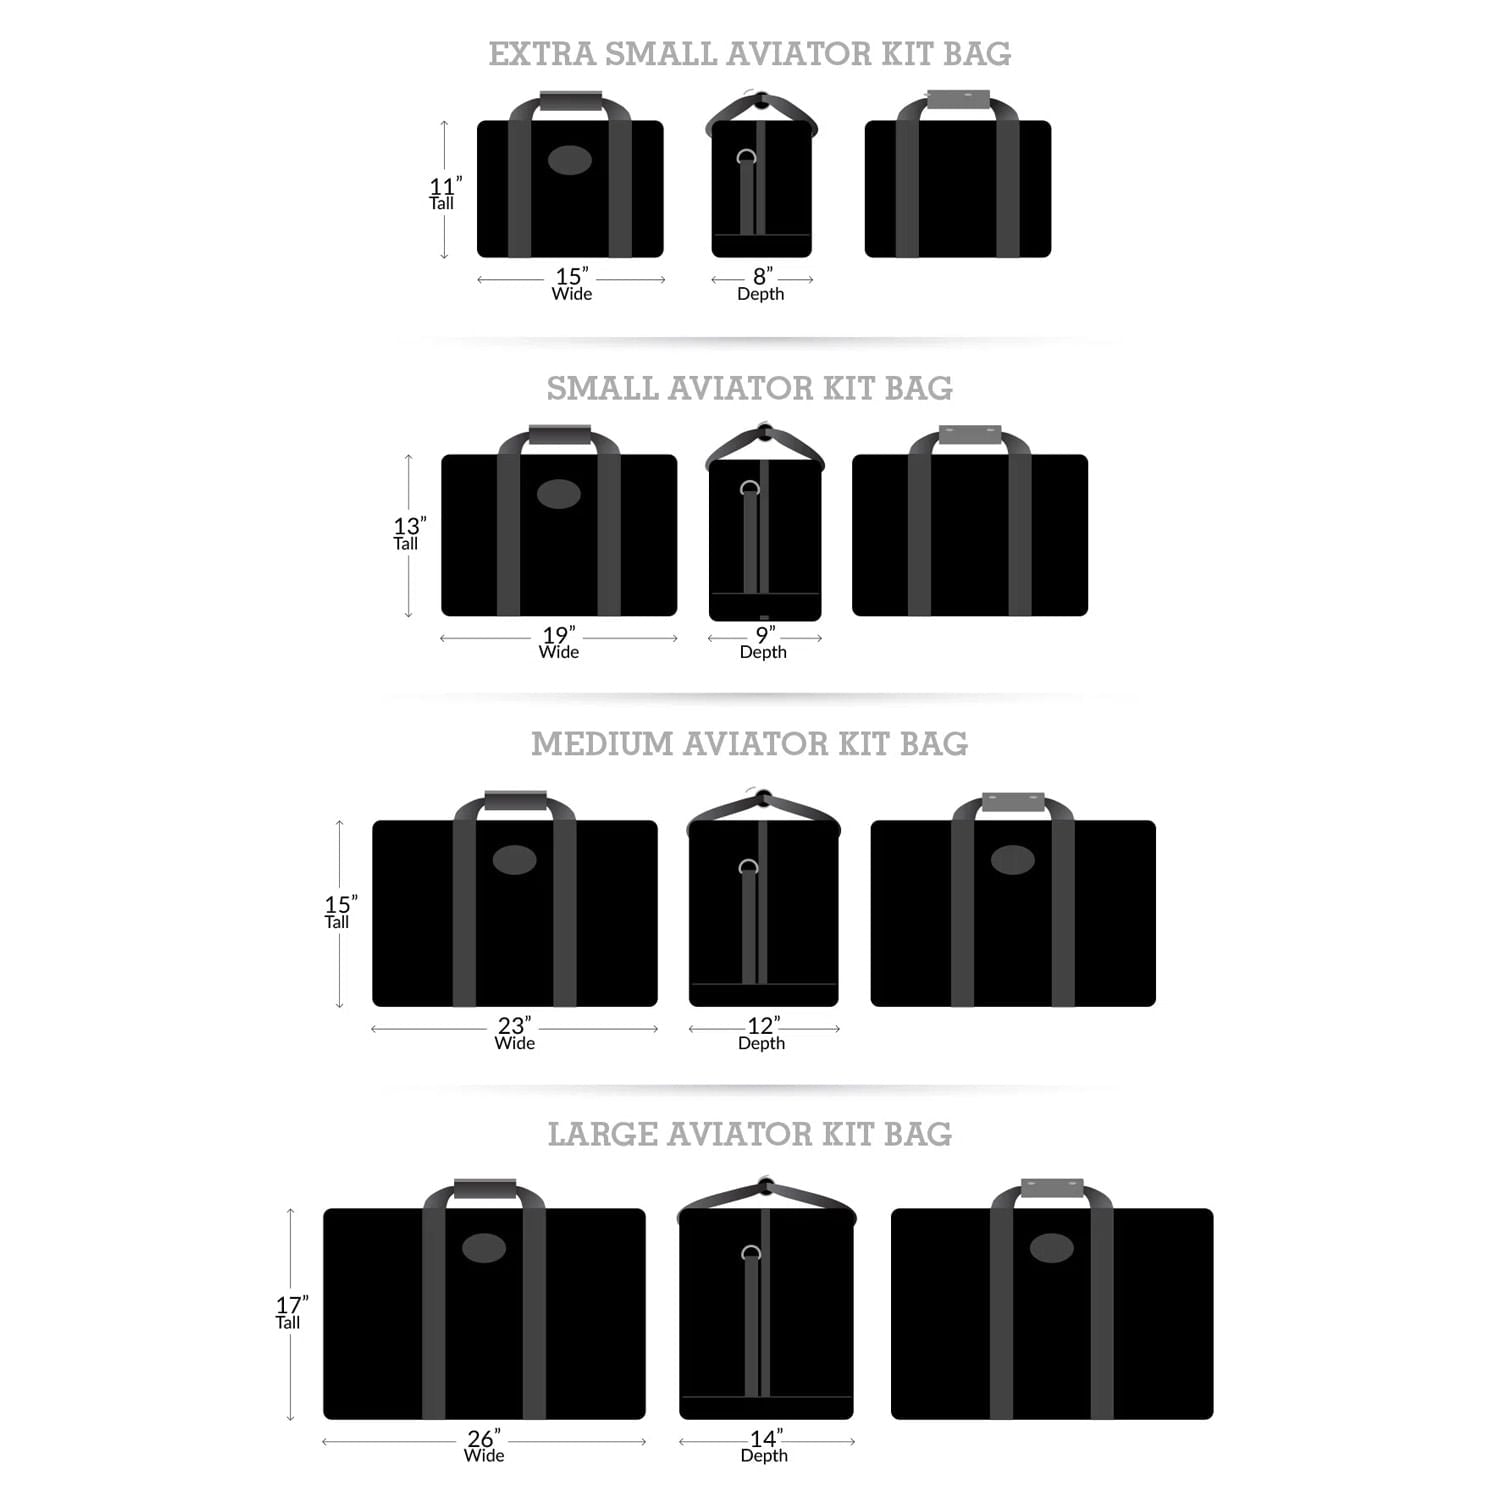 Red Oxx aviator kit bags measurements and comparison chart.   Extra Small at top - Small - Medium- Large at the bottom of chart. 